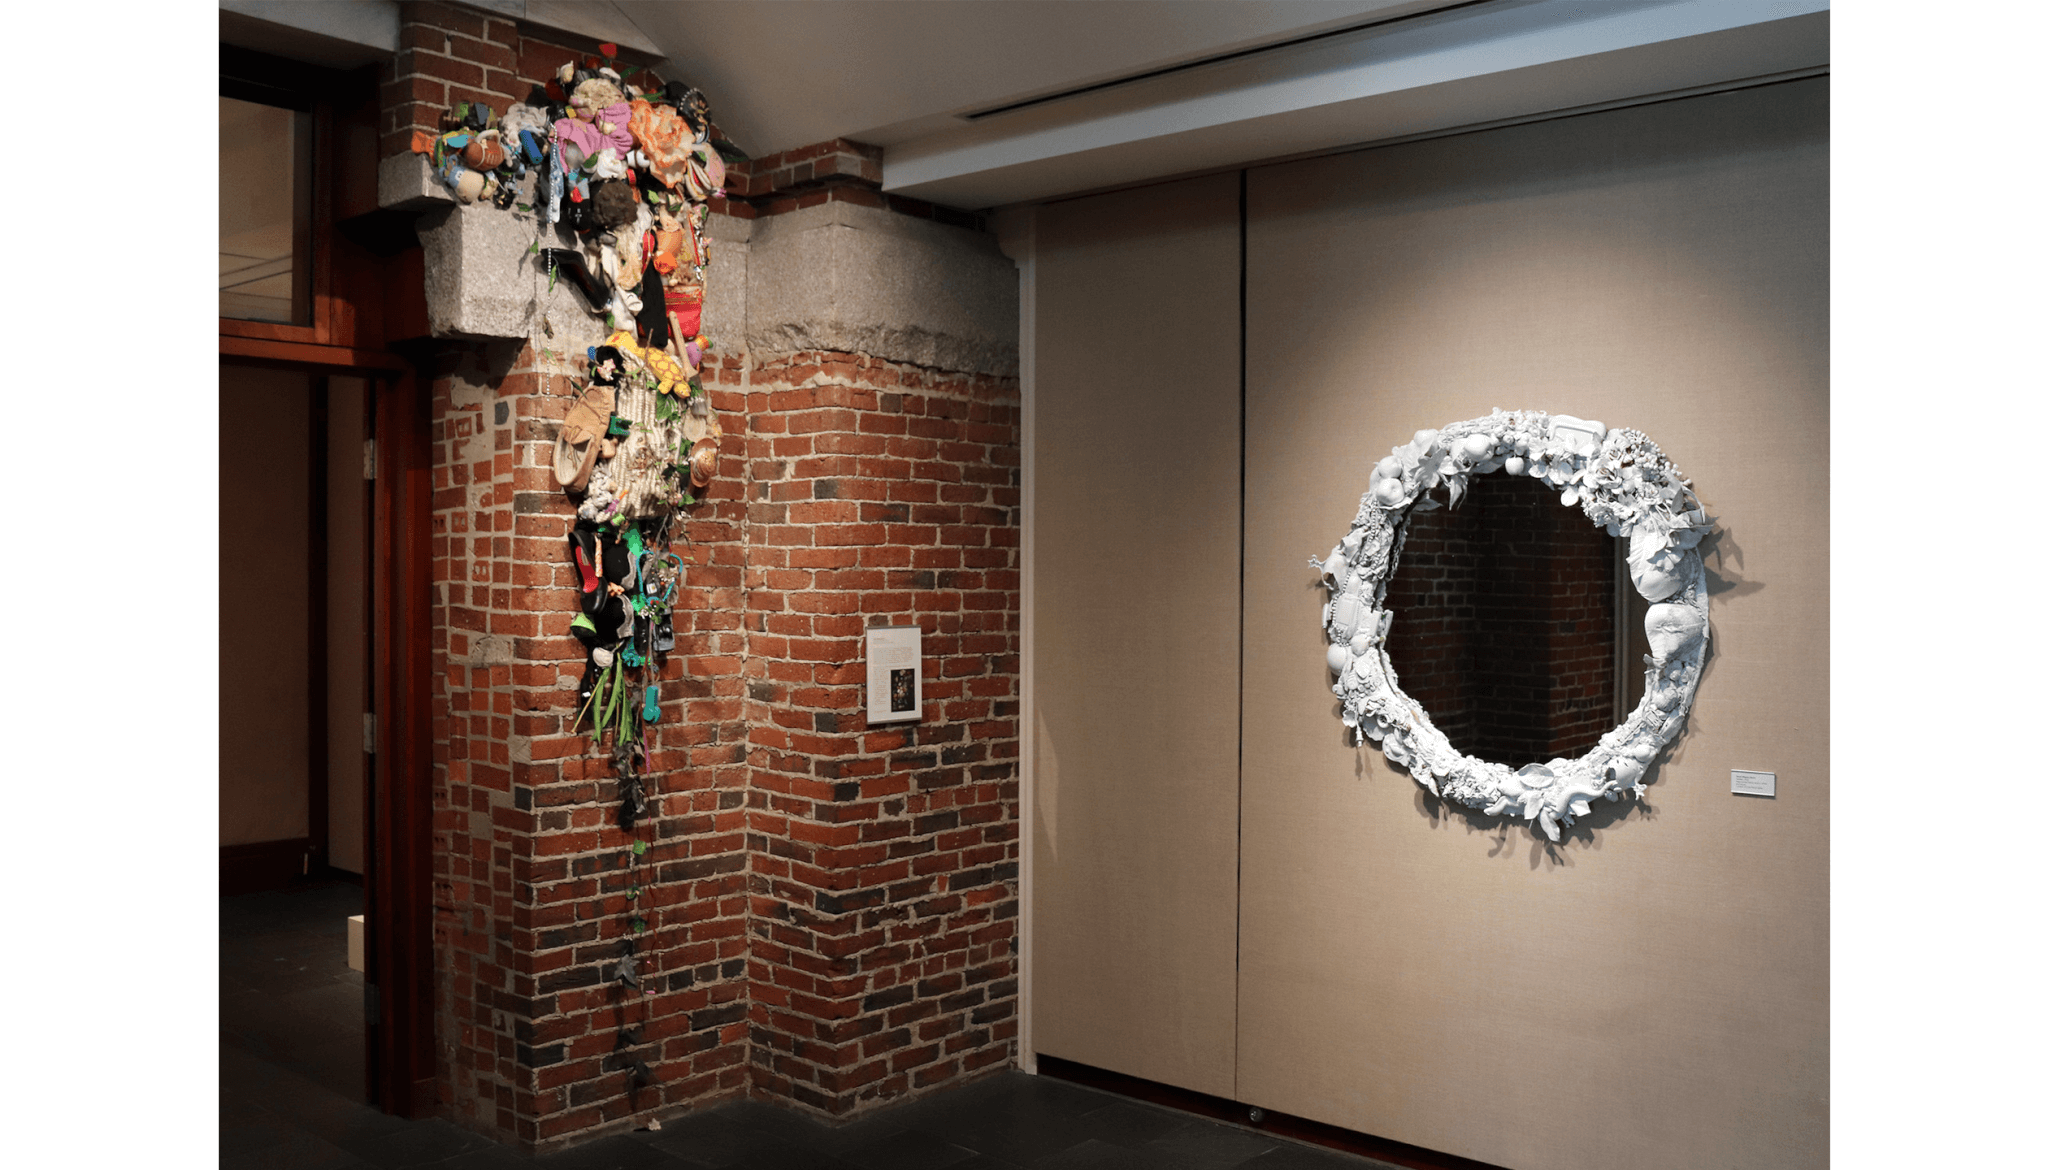 A white framed mirror and hanging sculpture is part of Sarah Meyers Brent's installation.